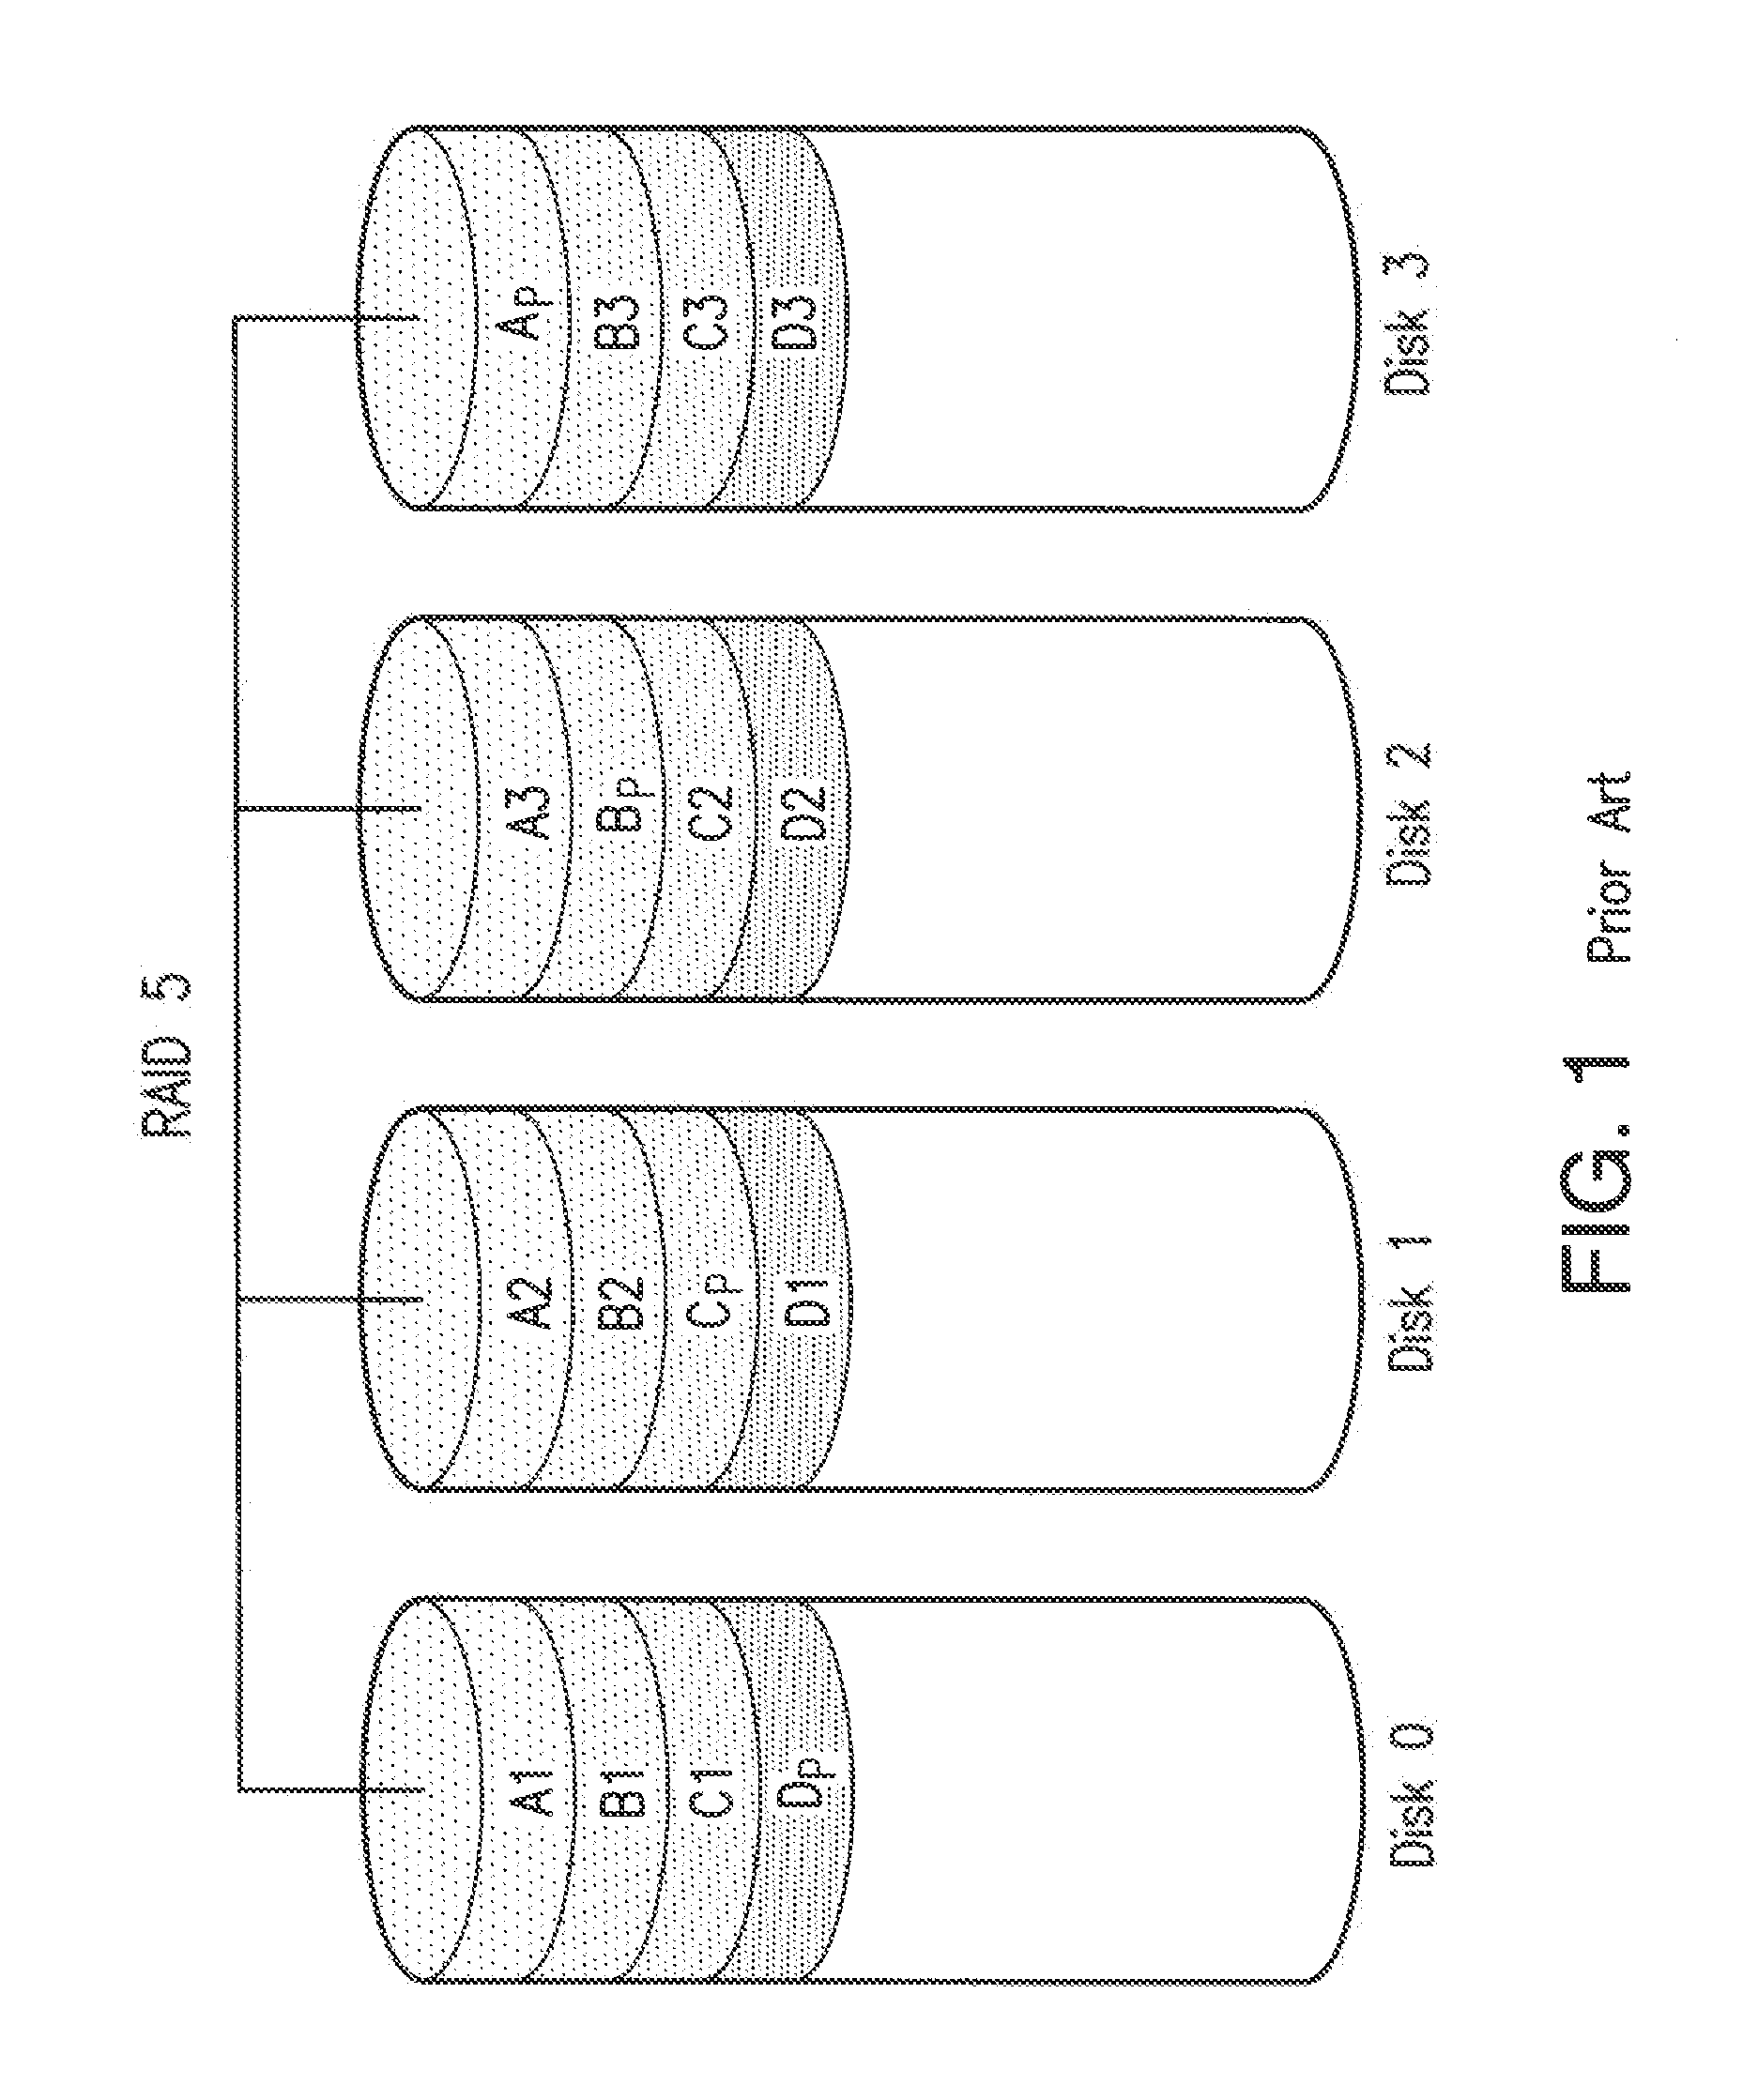 Data storage system and method for data migration between high-performance computing architectures and data storage devices using memory controller with embedded XOR capability